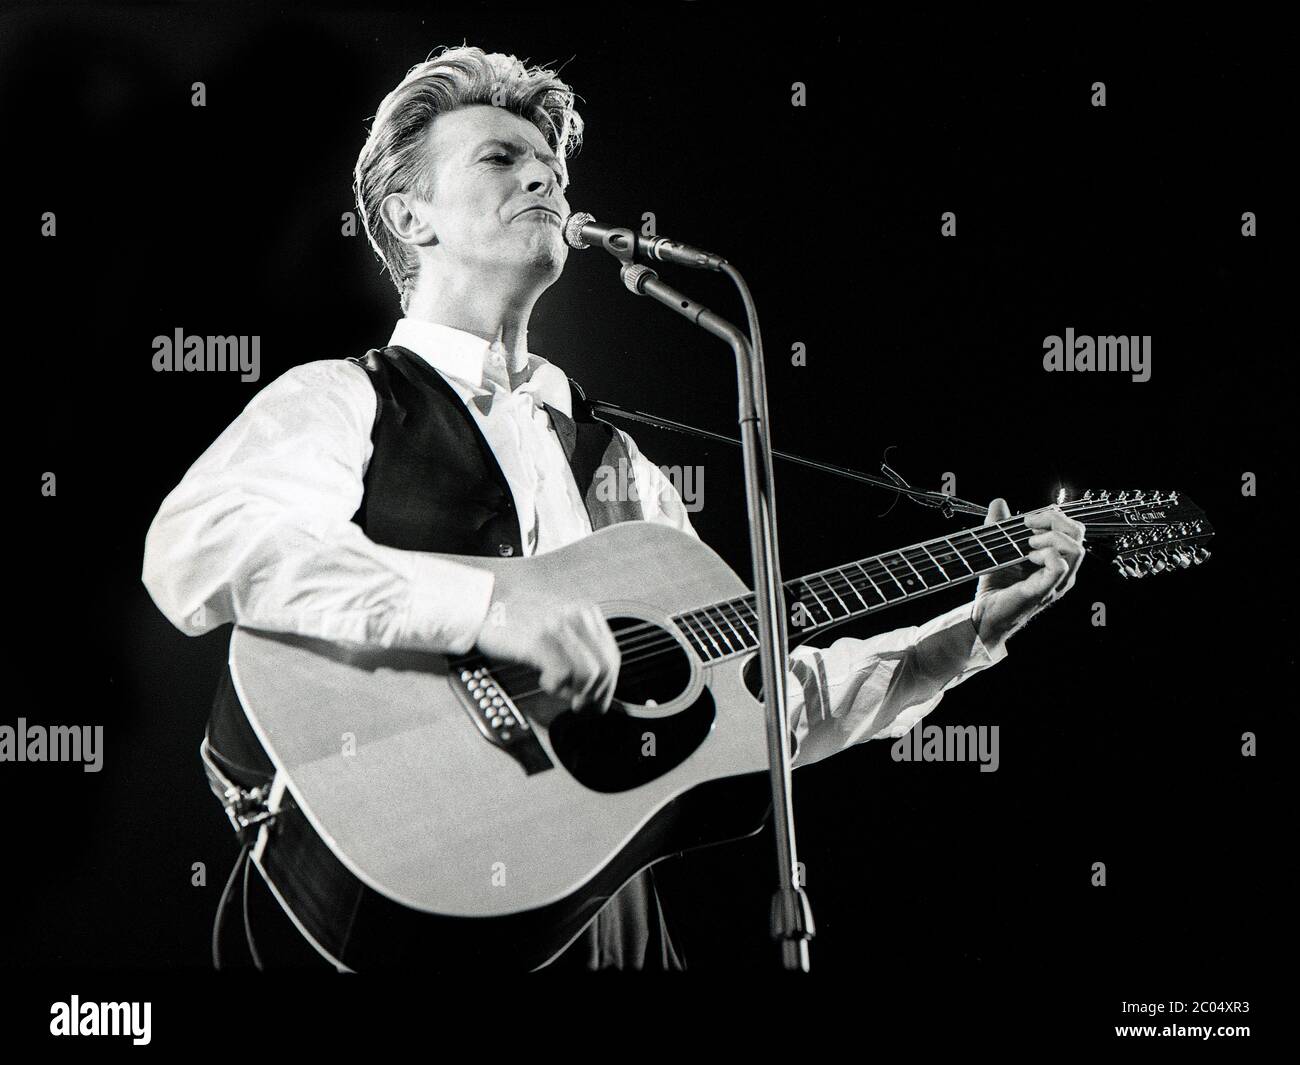 Jack jones singer hi-res stock photography and images - Alamy